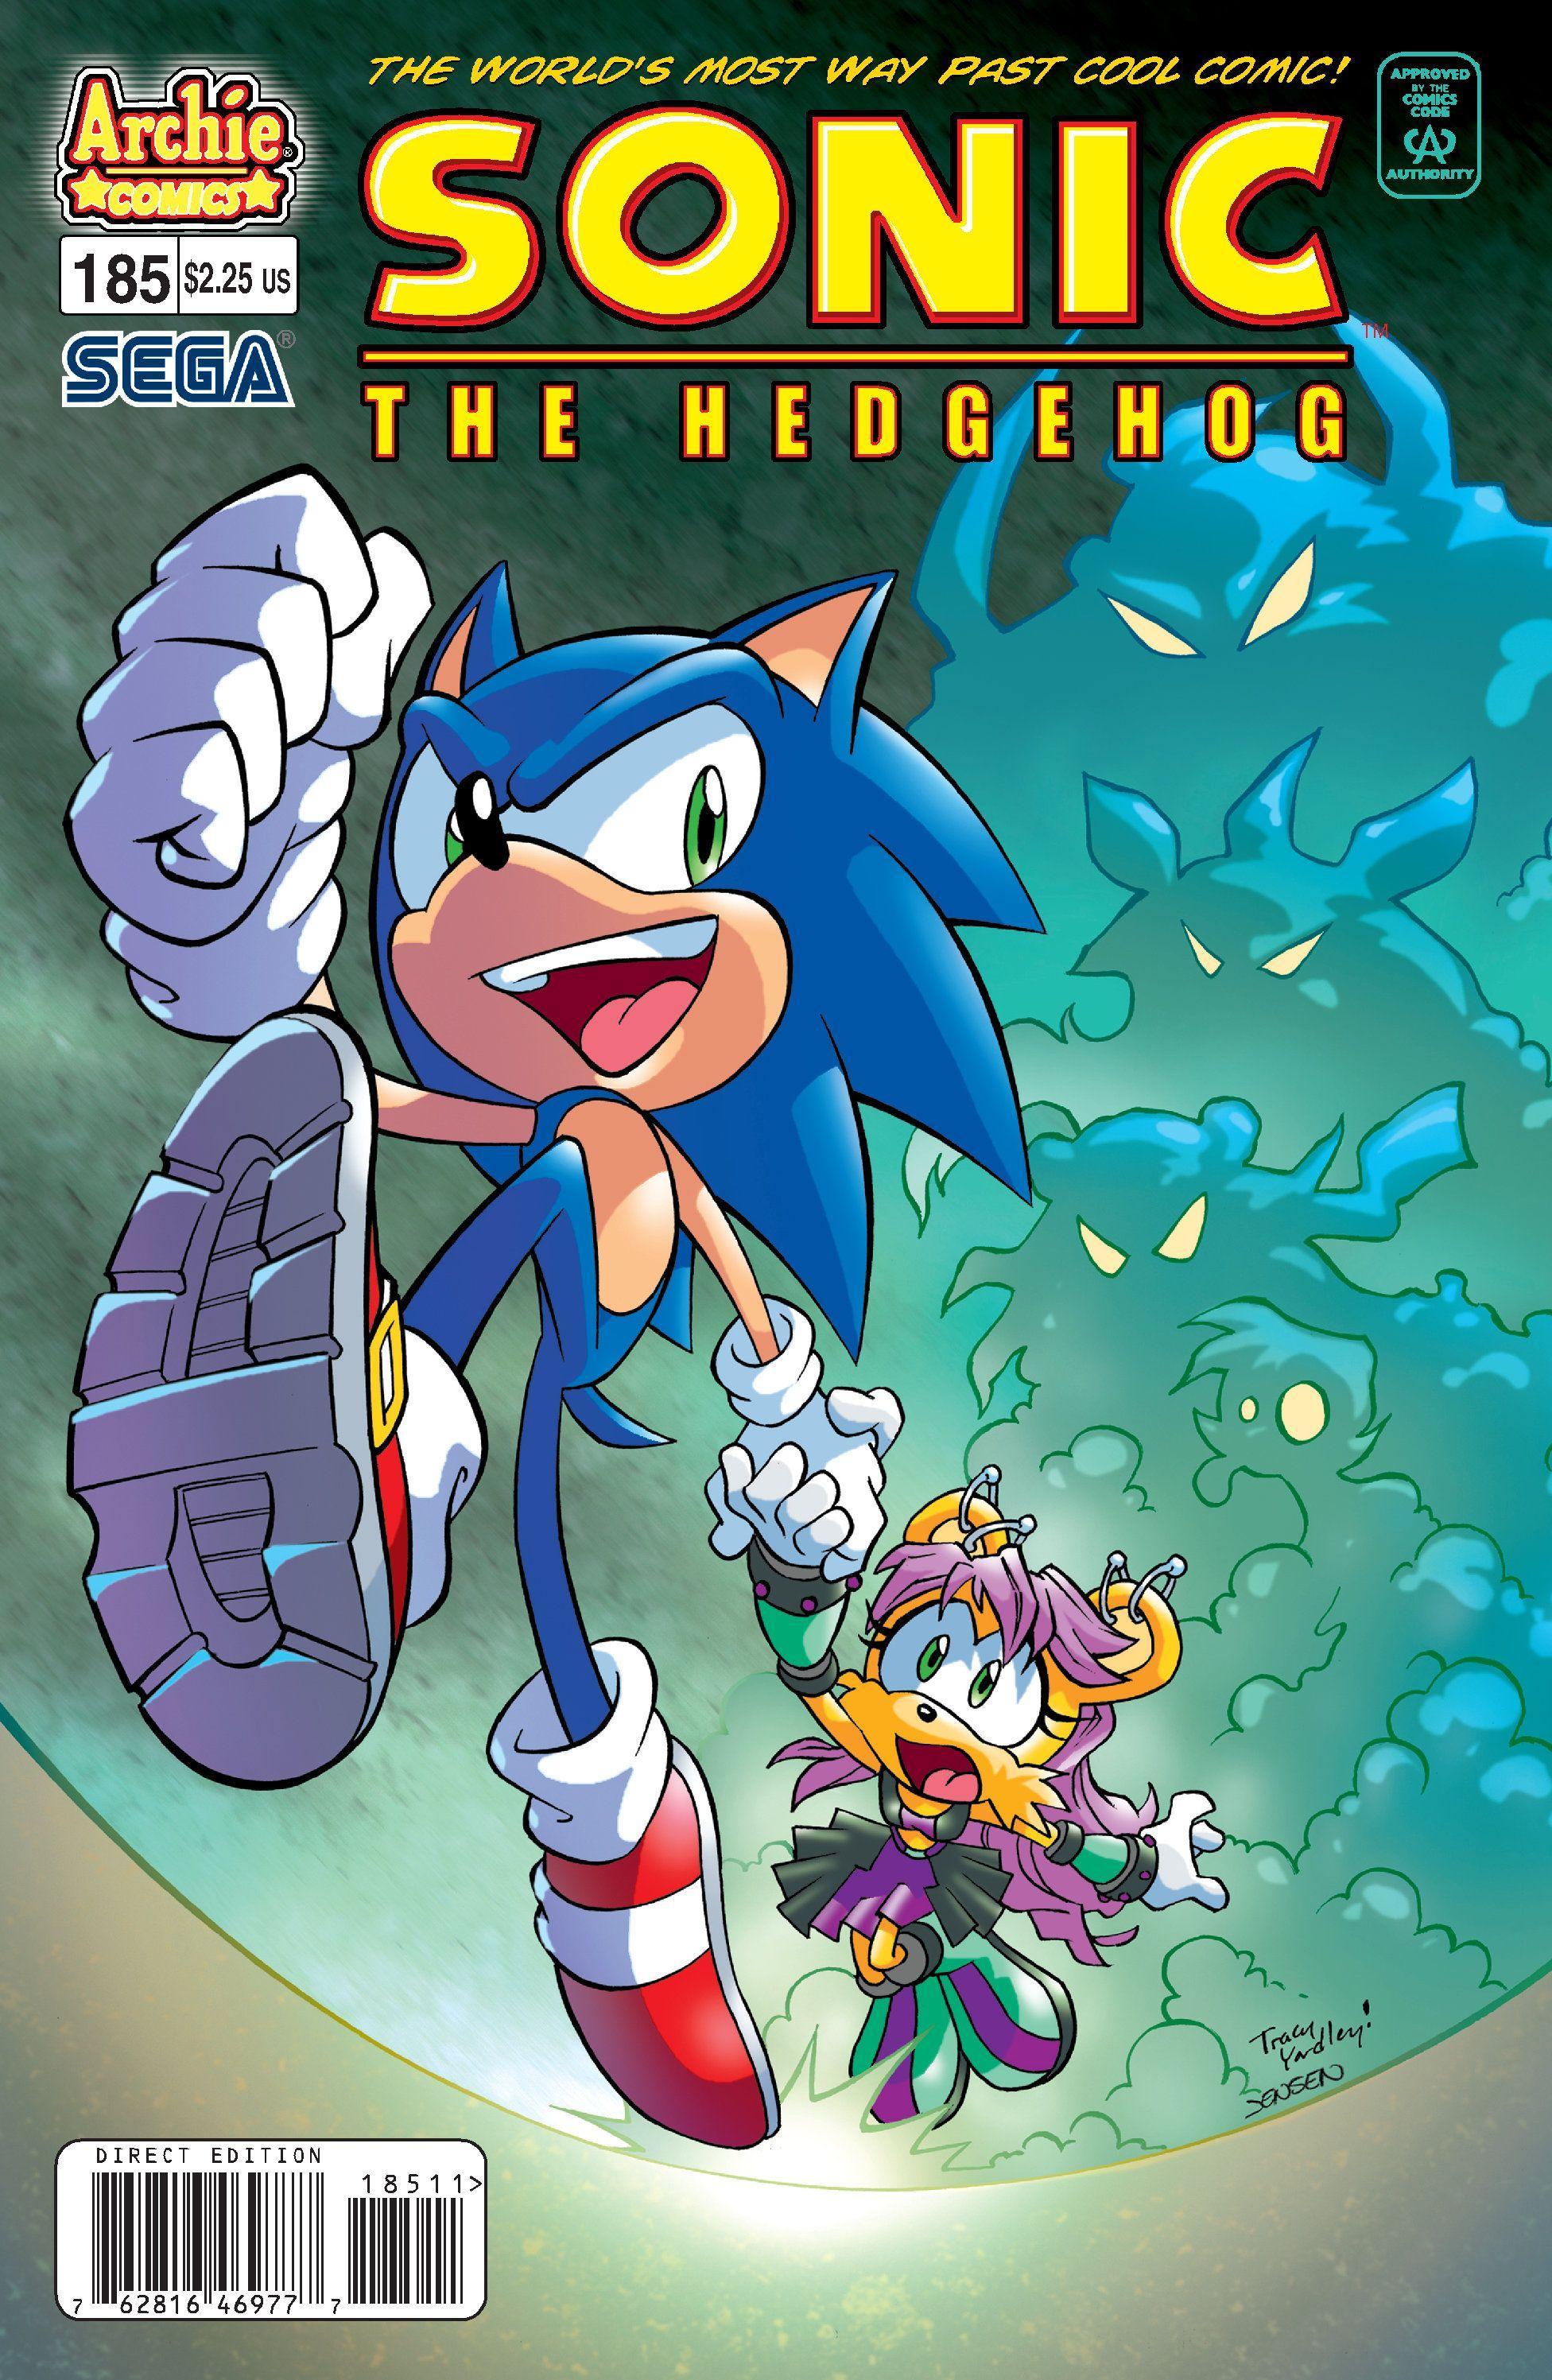 Semi Frequent Sonic Facts 🔫 on X: Mighty's incredible strength in Sonic  Mania originates from the Archie comics. He's actually much stronger in  that continuity.  / X